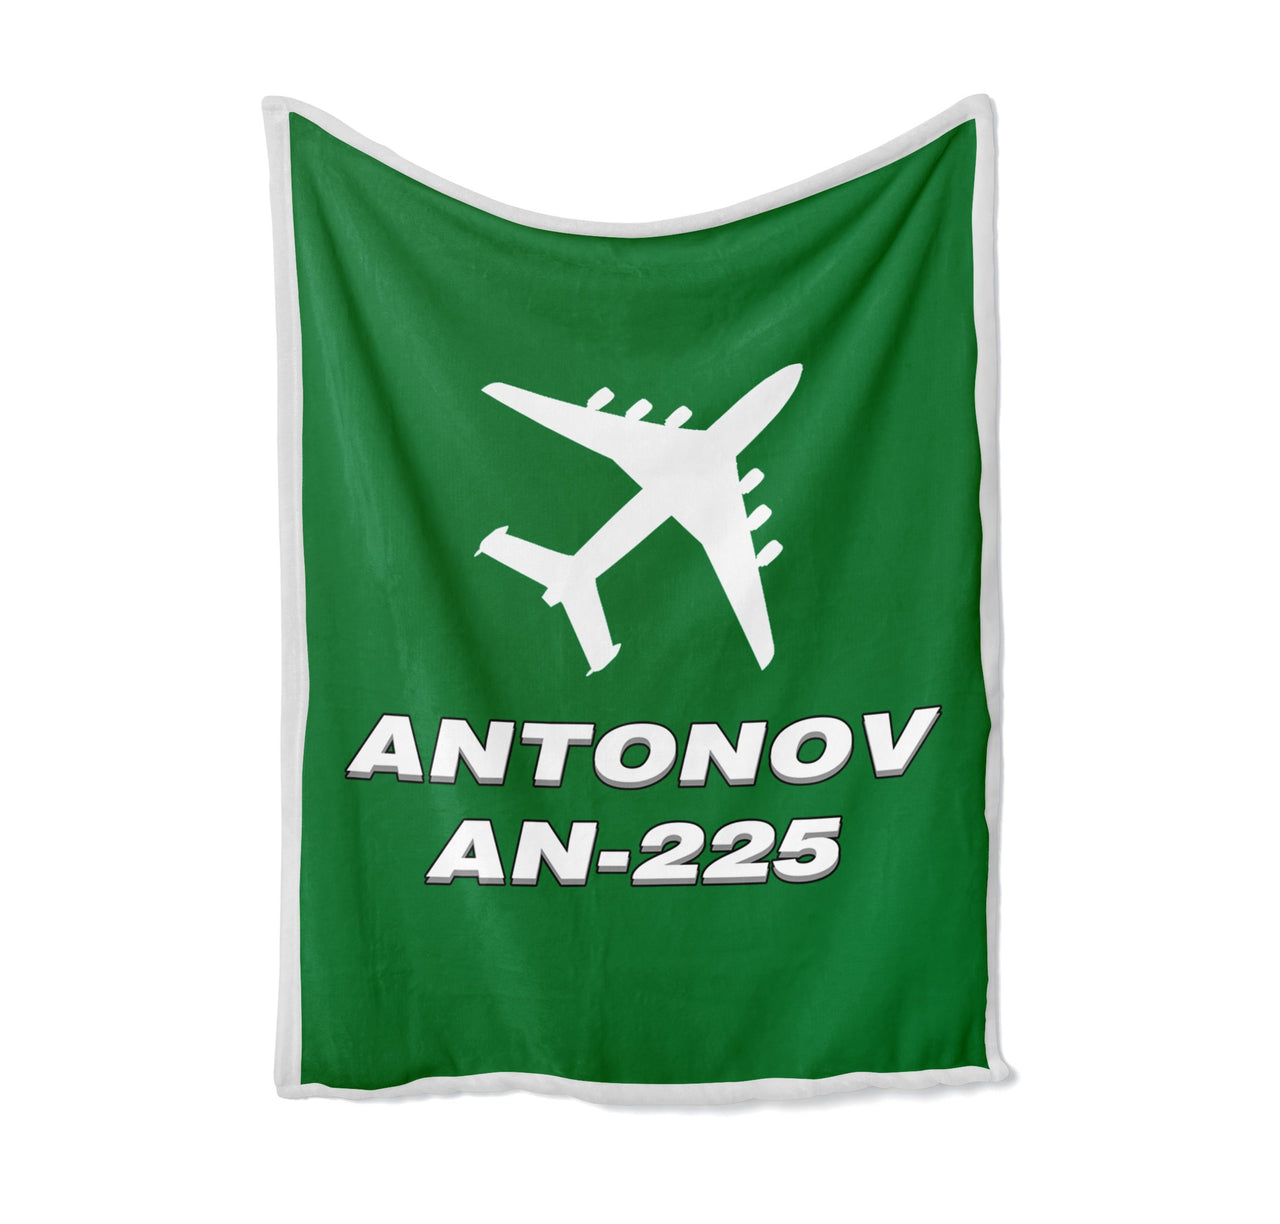 Antonov AN-225 (28) Designed Bed Blankets & Covers